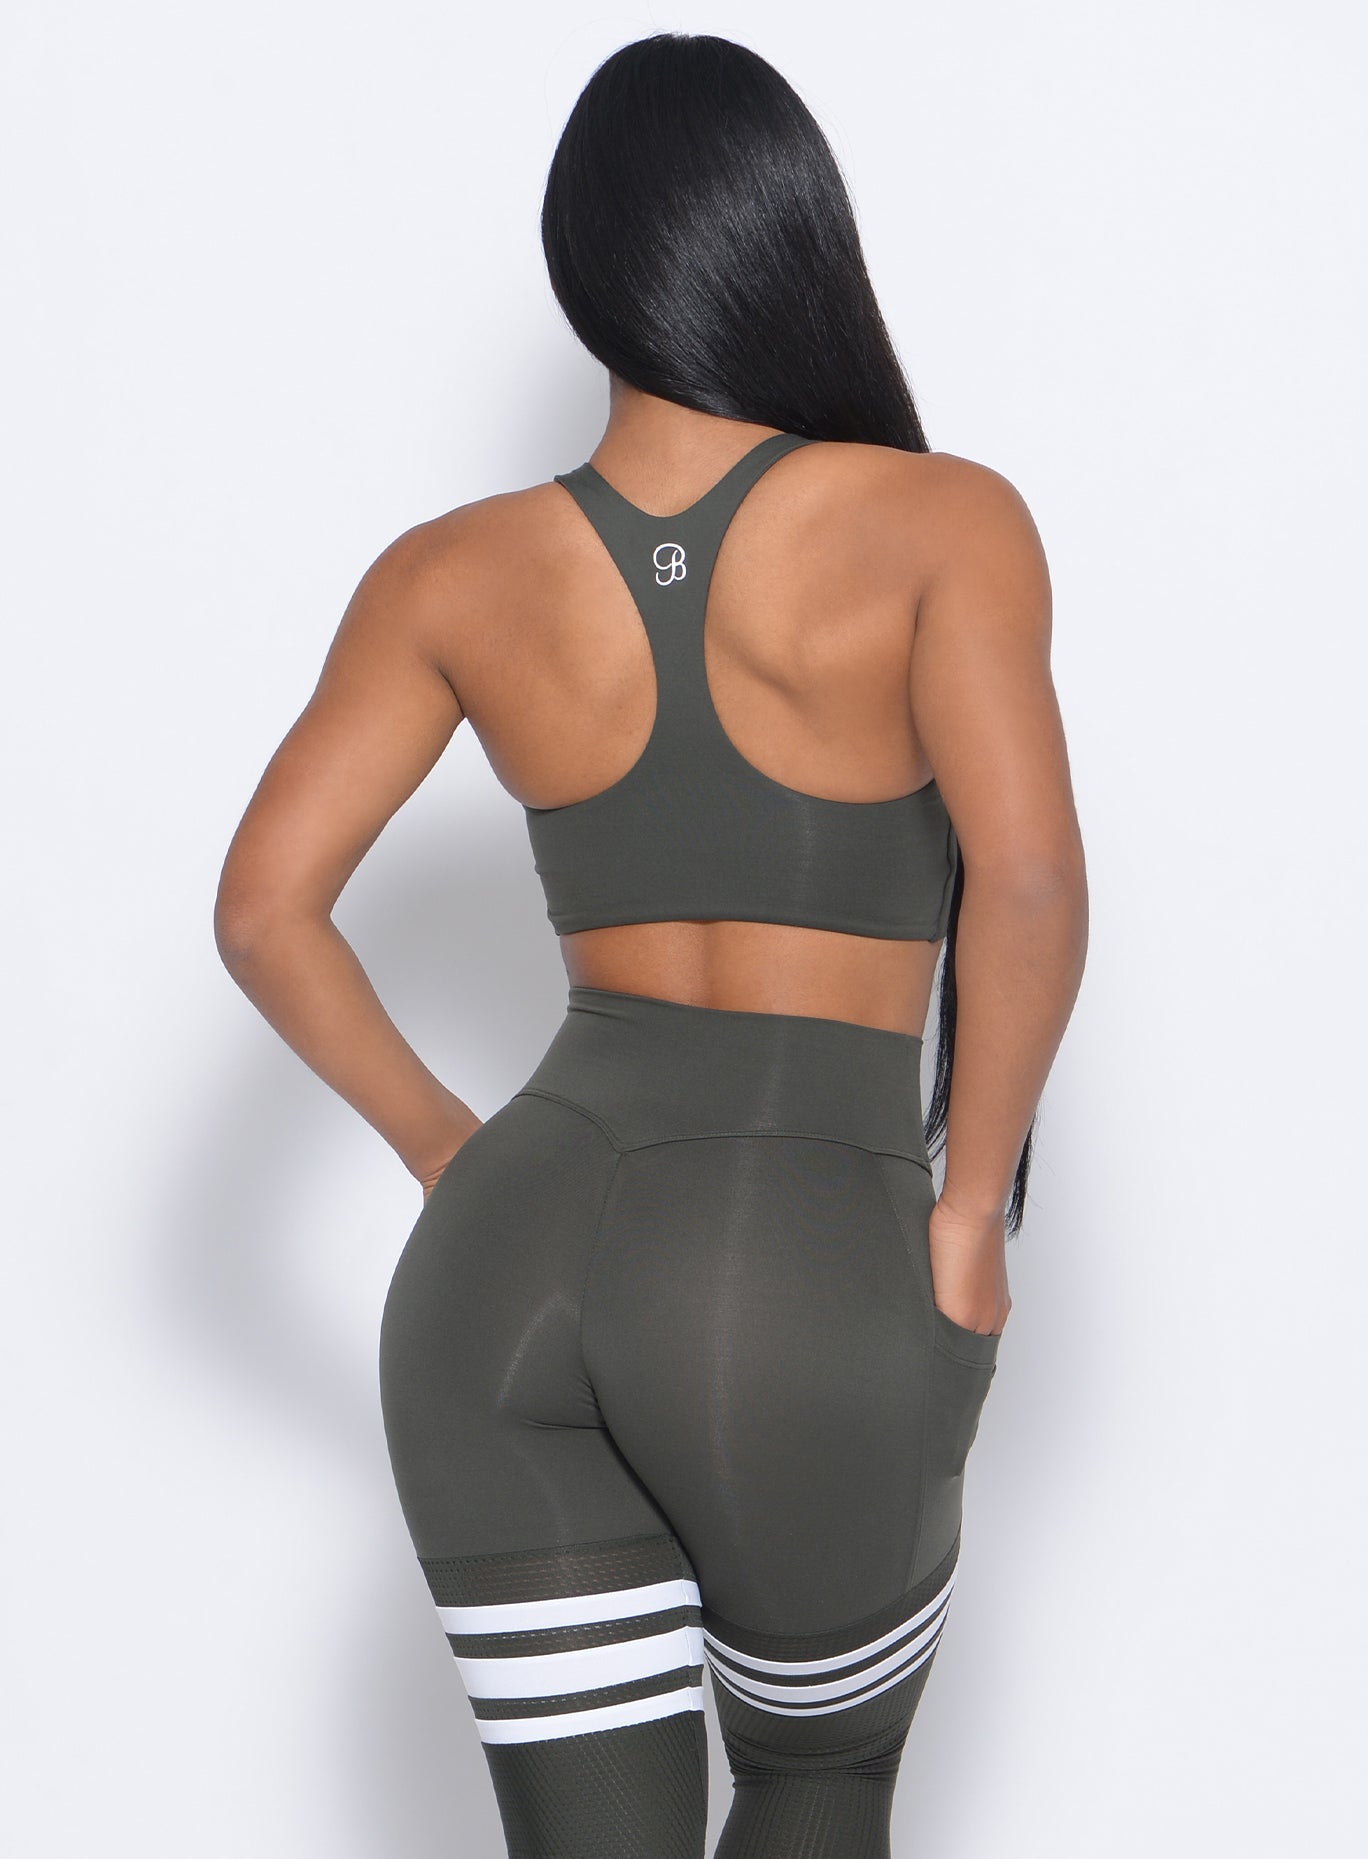 Back view of the model with her hand in pocket wearing our keyhole bralette in hunter green color and a matching leggings